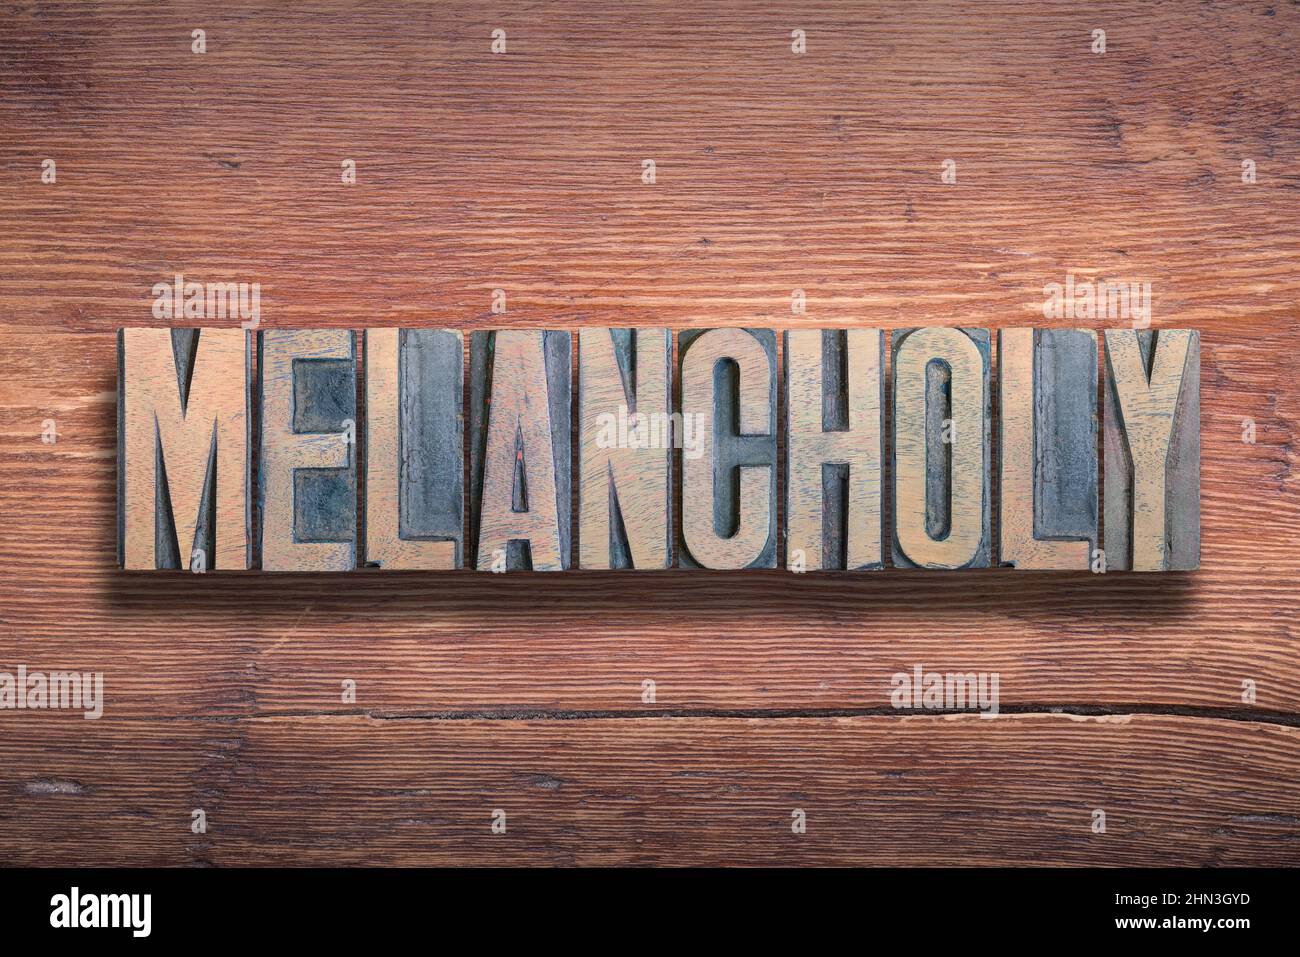 melancholy word combined on vintage varnished wooden surface Stock Photo